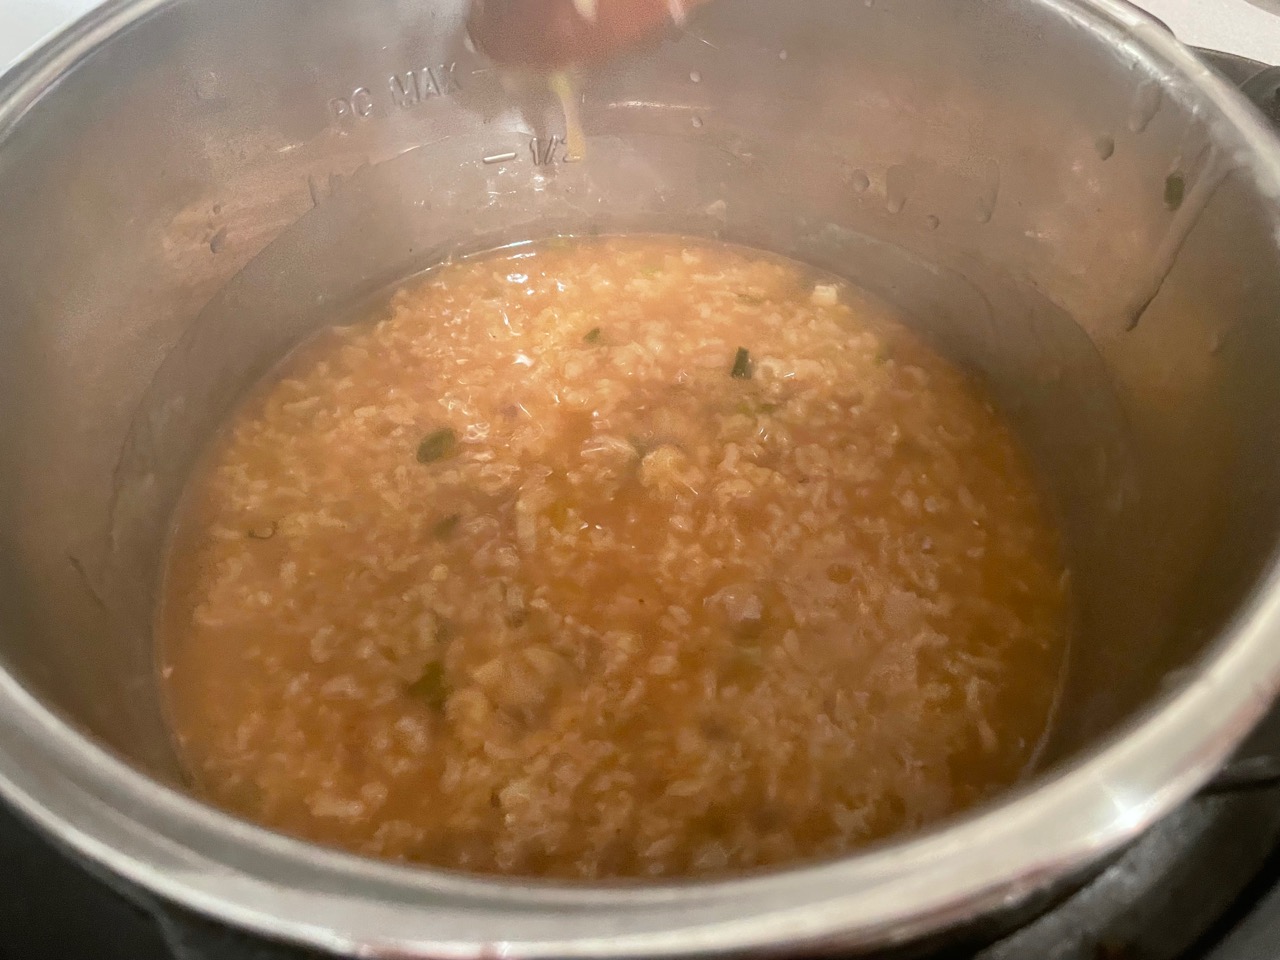 congee cooking in the pot